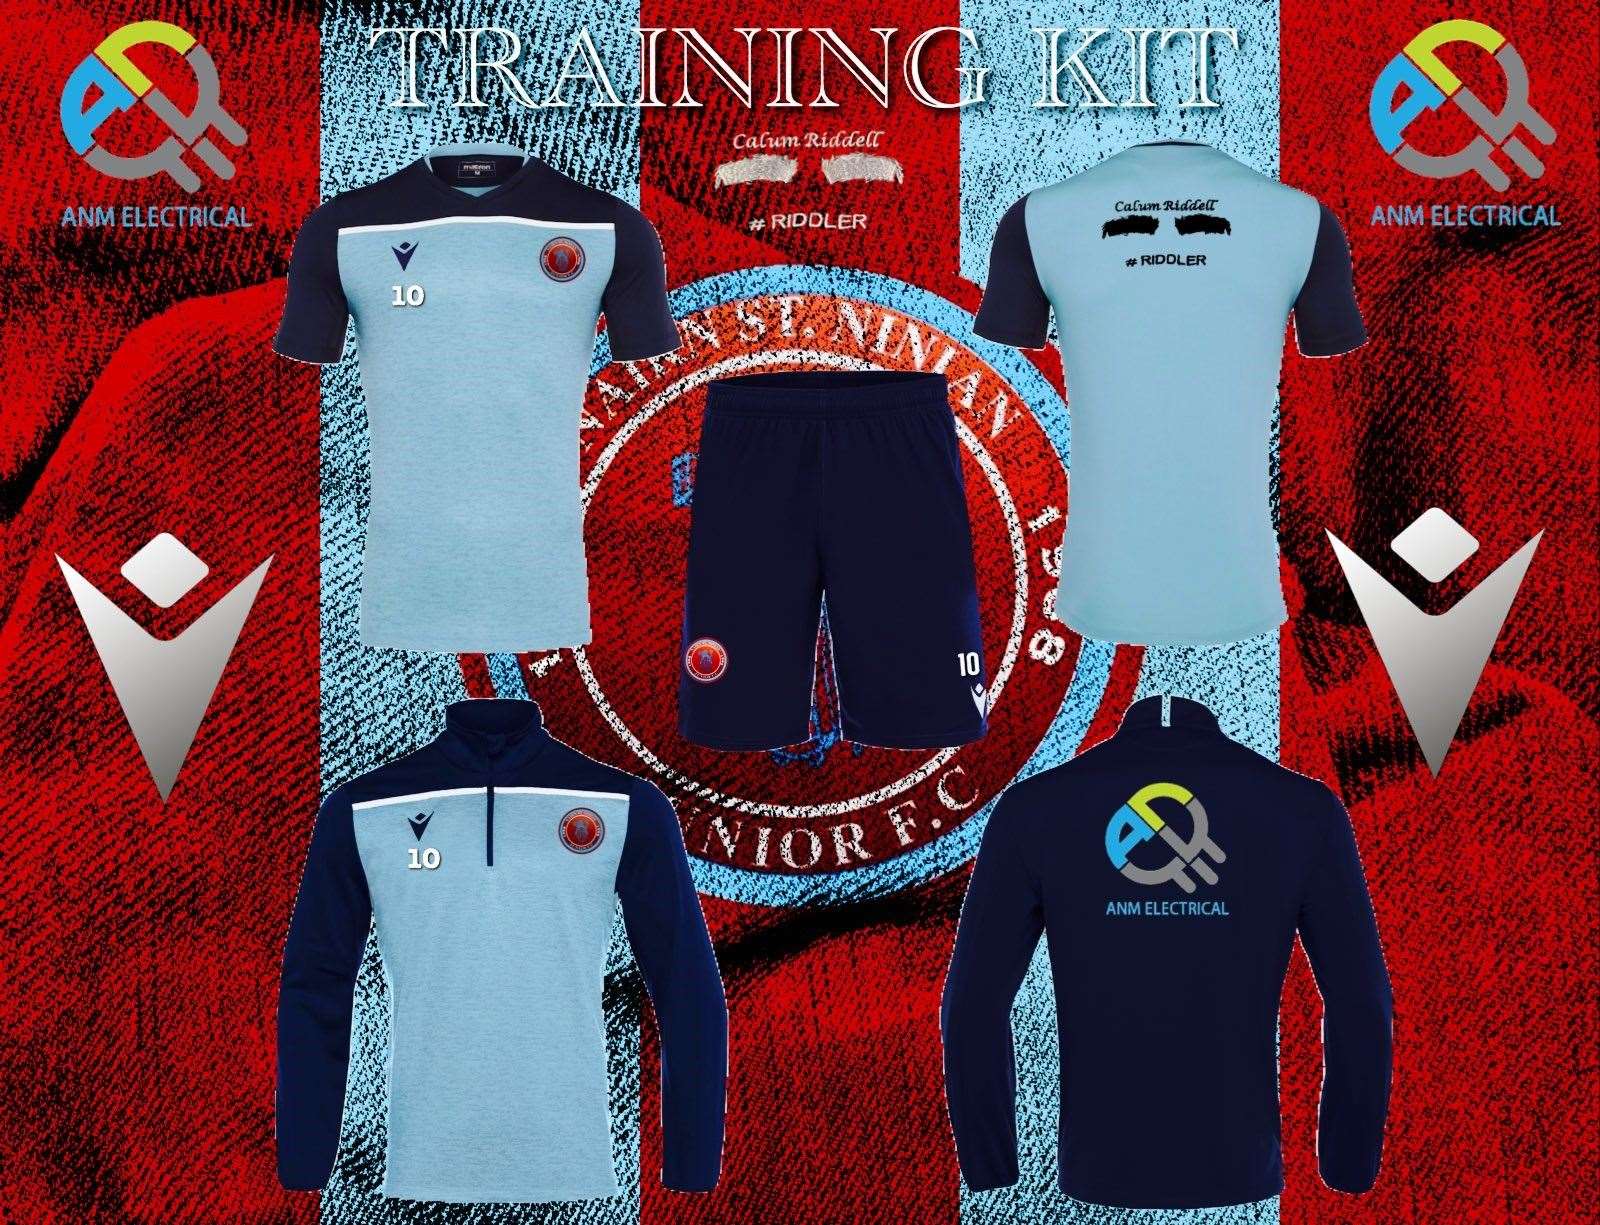 Images of the training and travel kit.